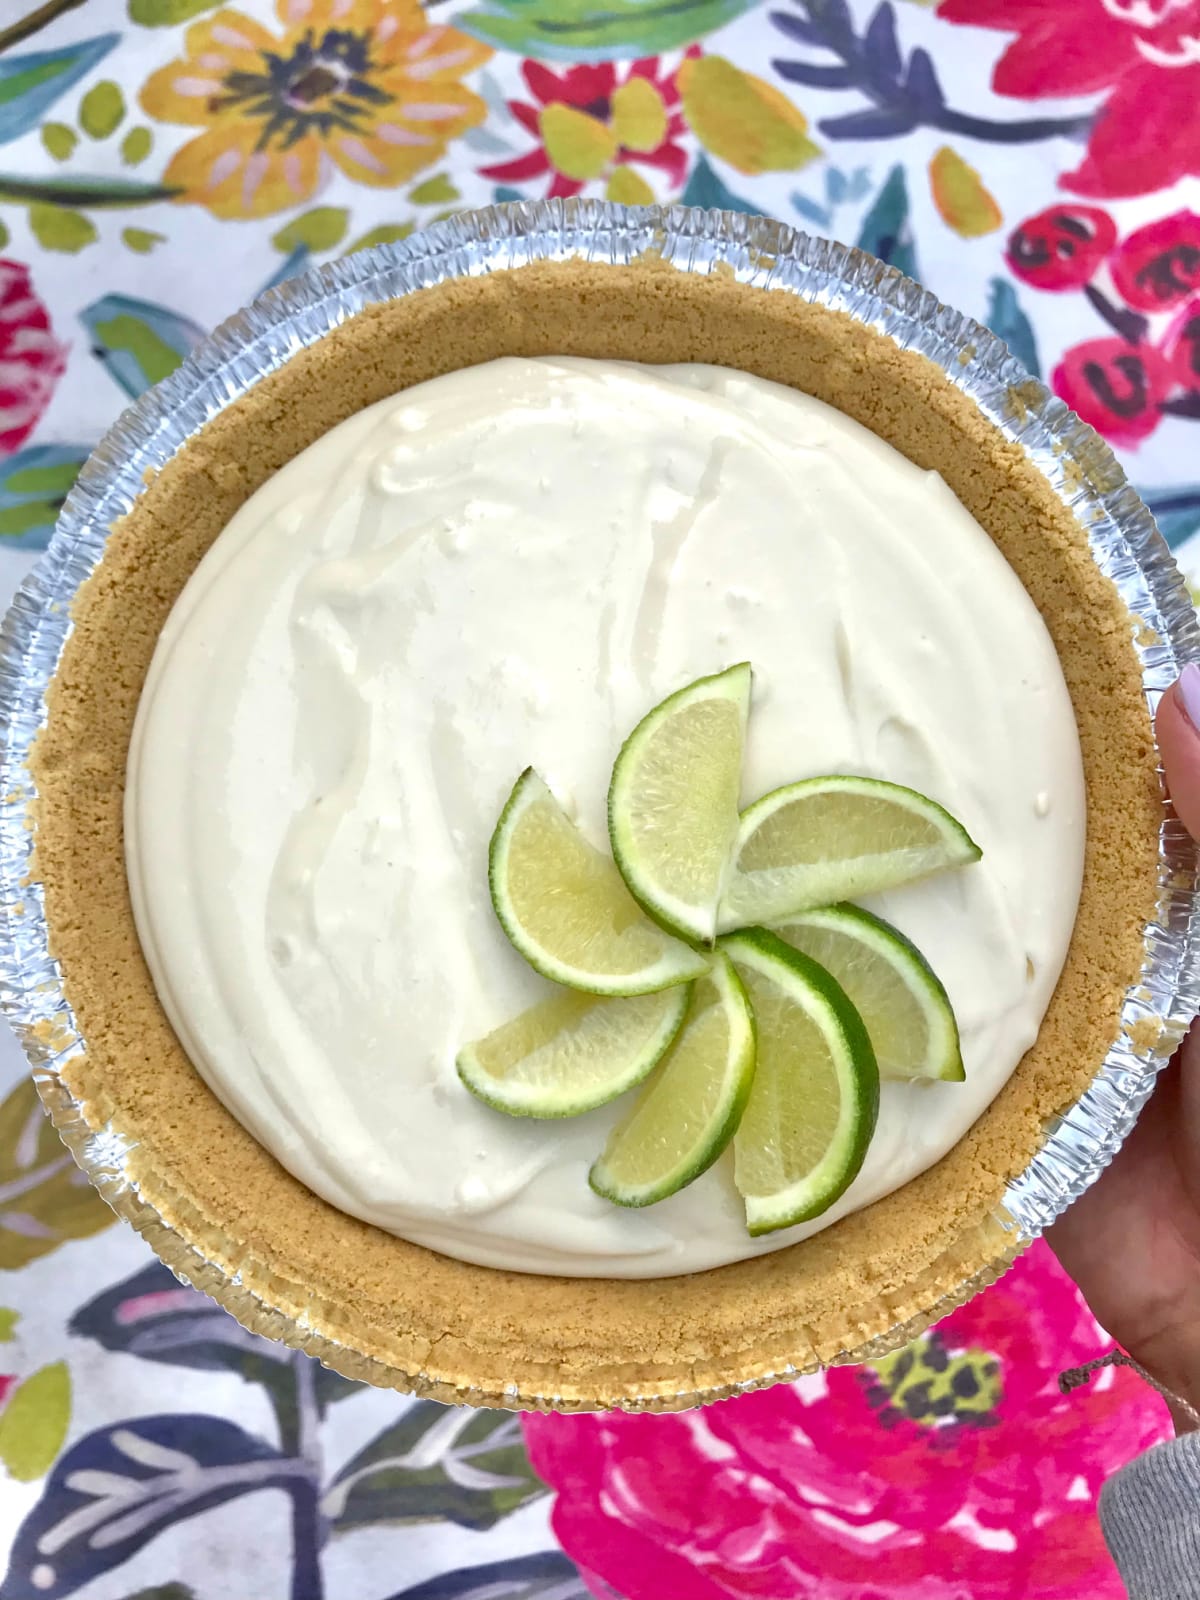 Homemade key lime pie with limes on tip sitting on a pretty floral table cloth